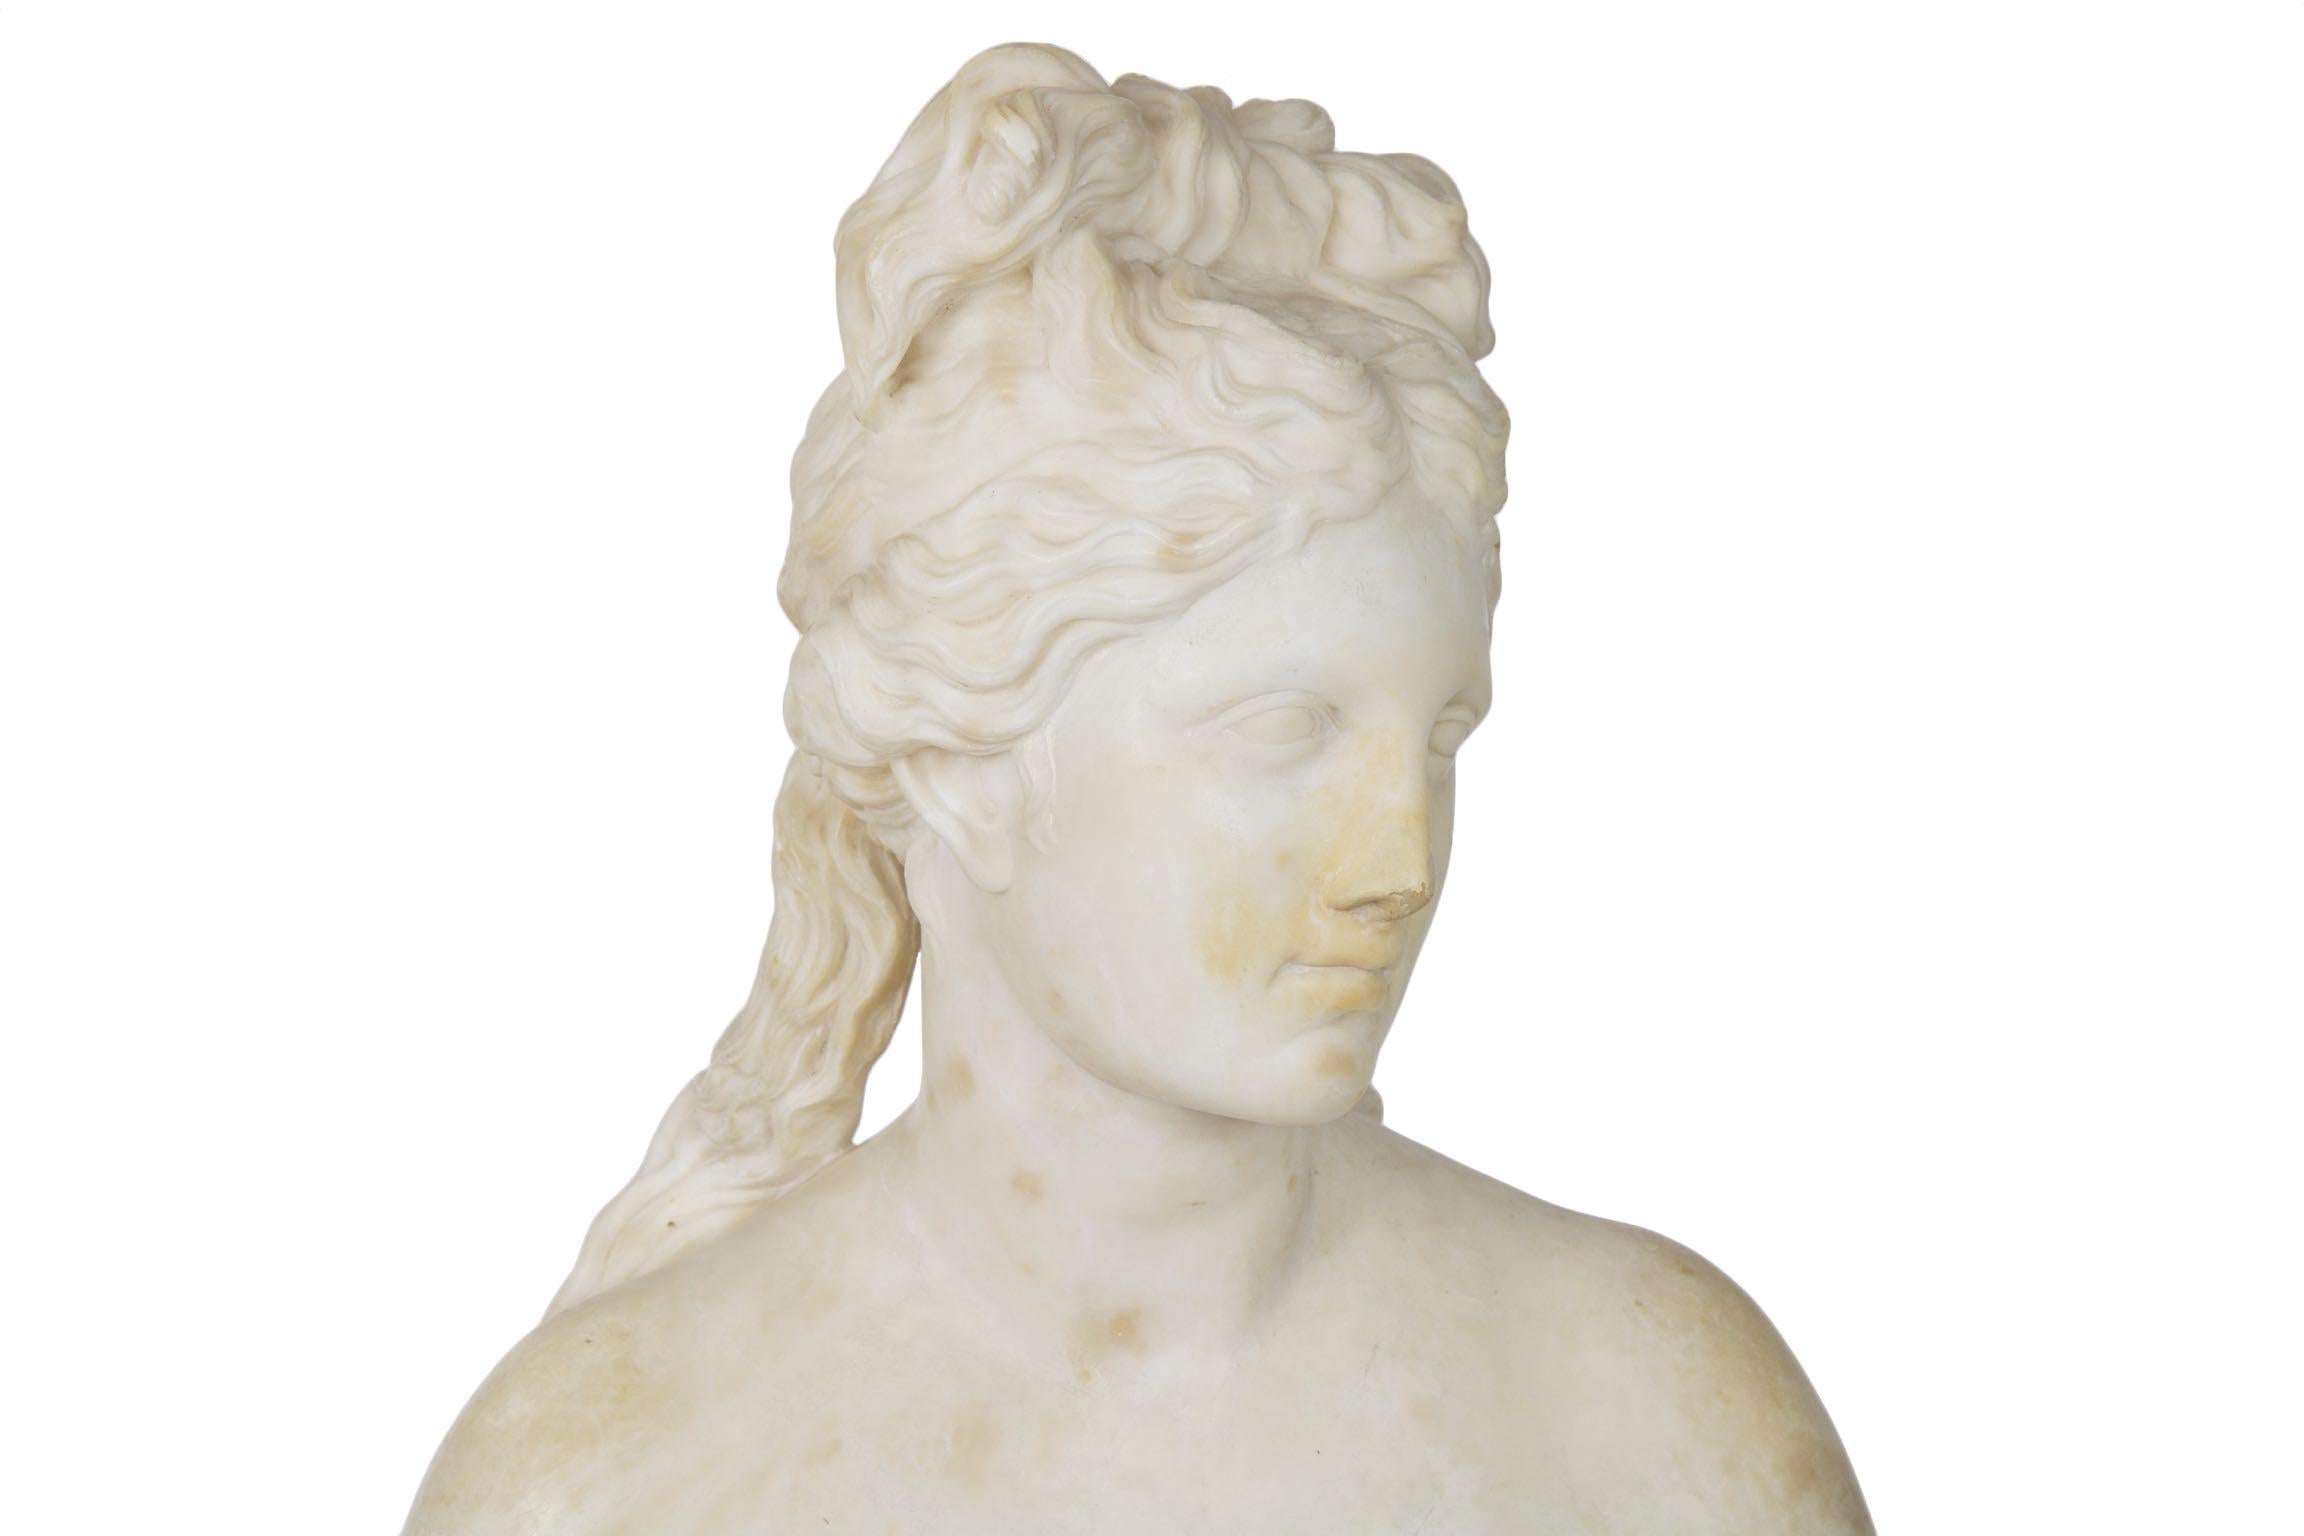 This Grand Tour bust of the Capitoline Venus was carved after the antique, the work is signed on the integral plinth V. Campidoglio and was executed during the second half of the 19th century. It is captures Aphrodite immediately before taking a